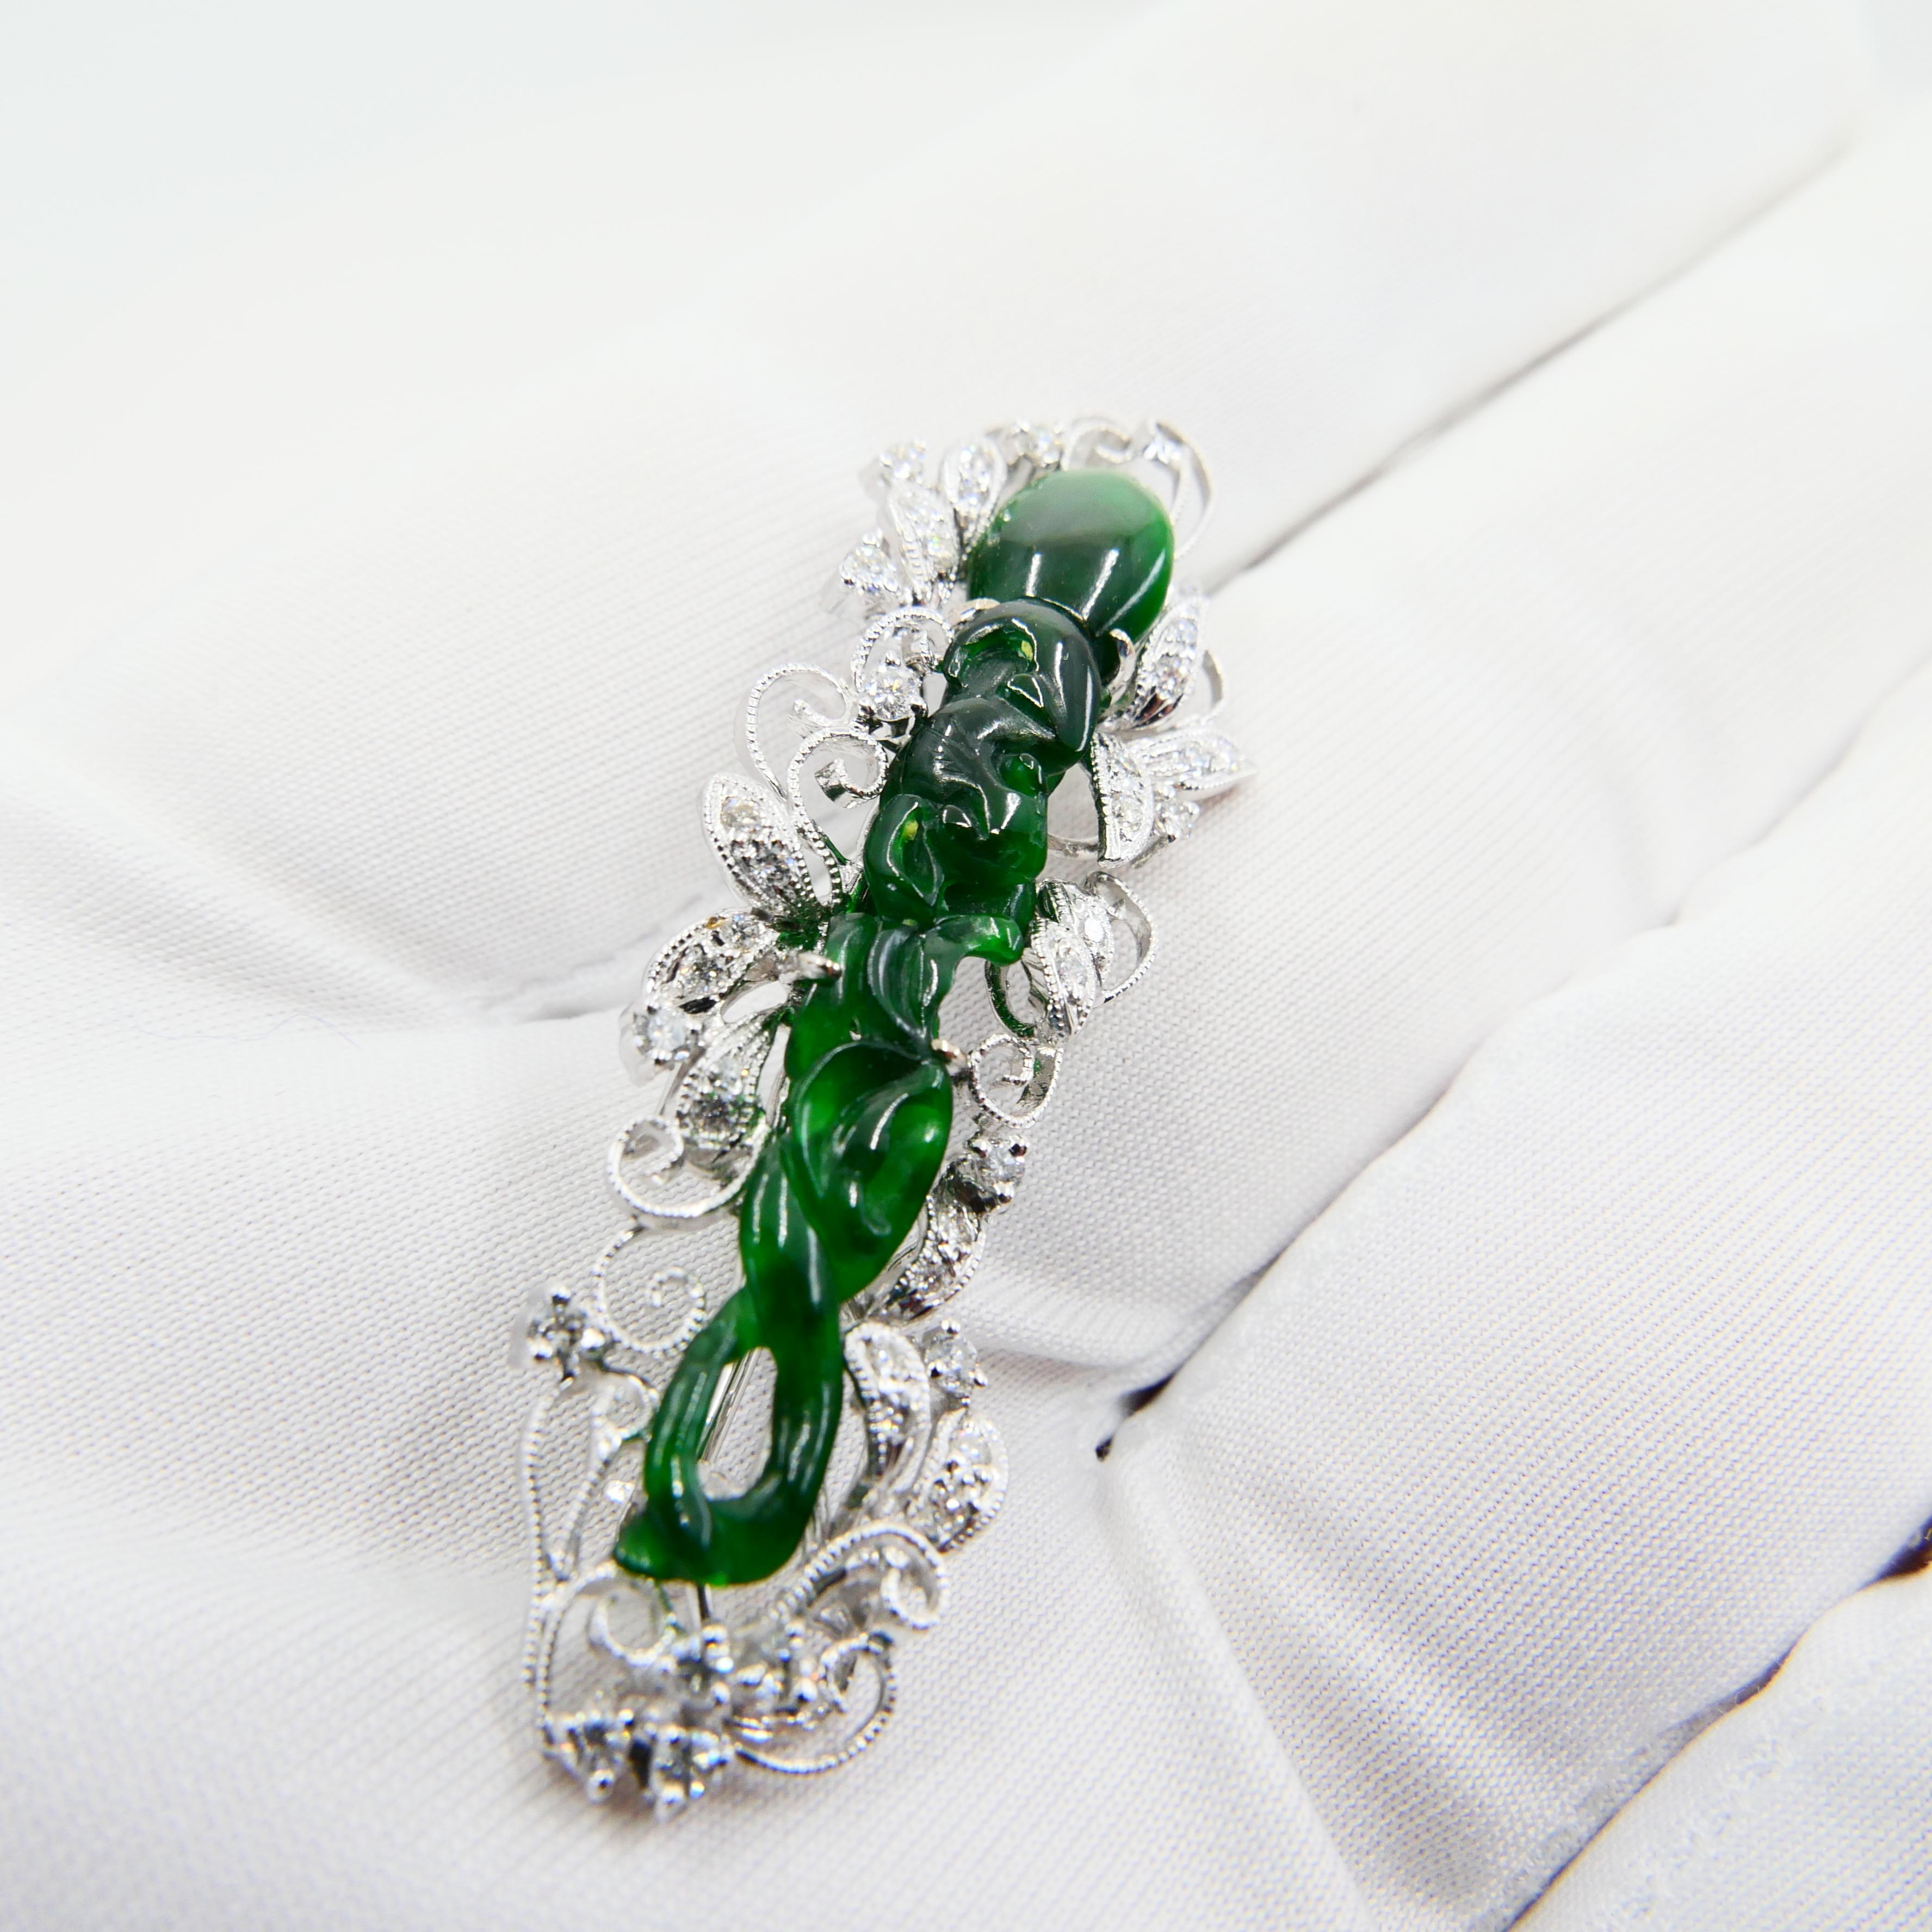 Certified Intense Green Carved Jade & Diamond Brooch, Close to Imperial Green For Sale 4